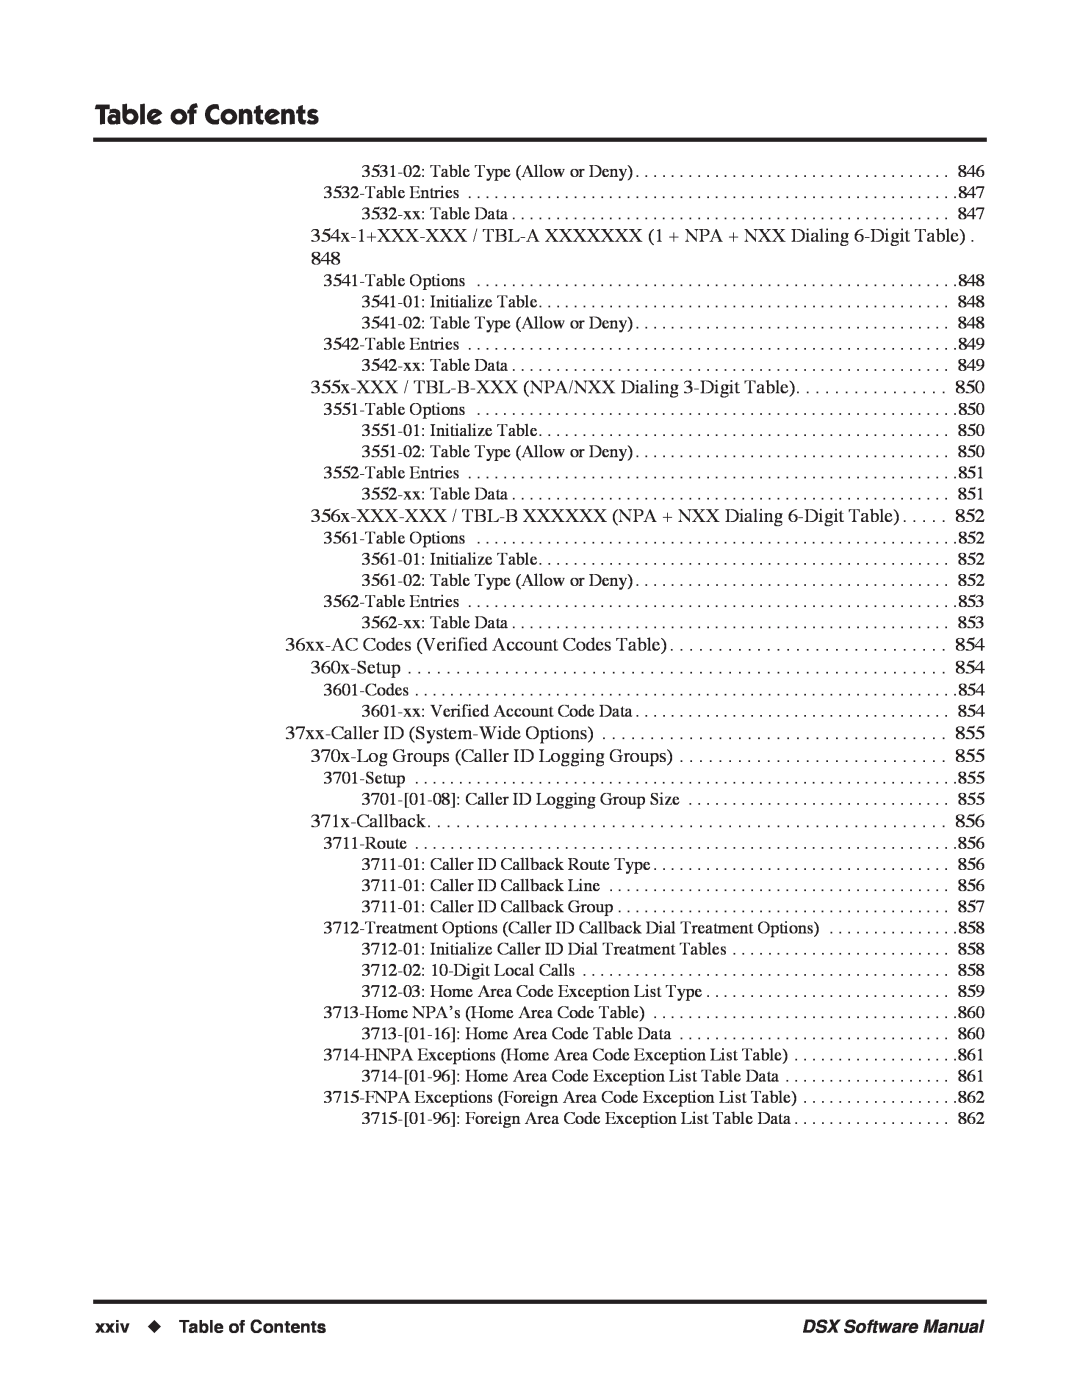 NEC N 1093100, P software manual xxiv Table of Contents 